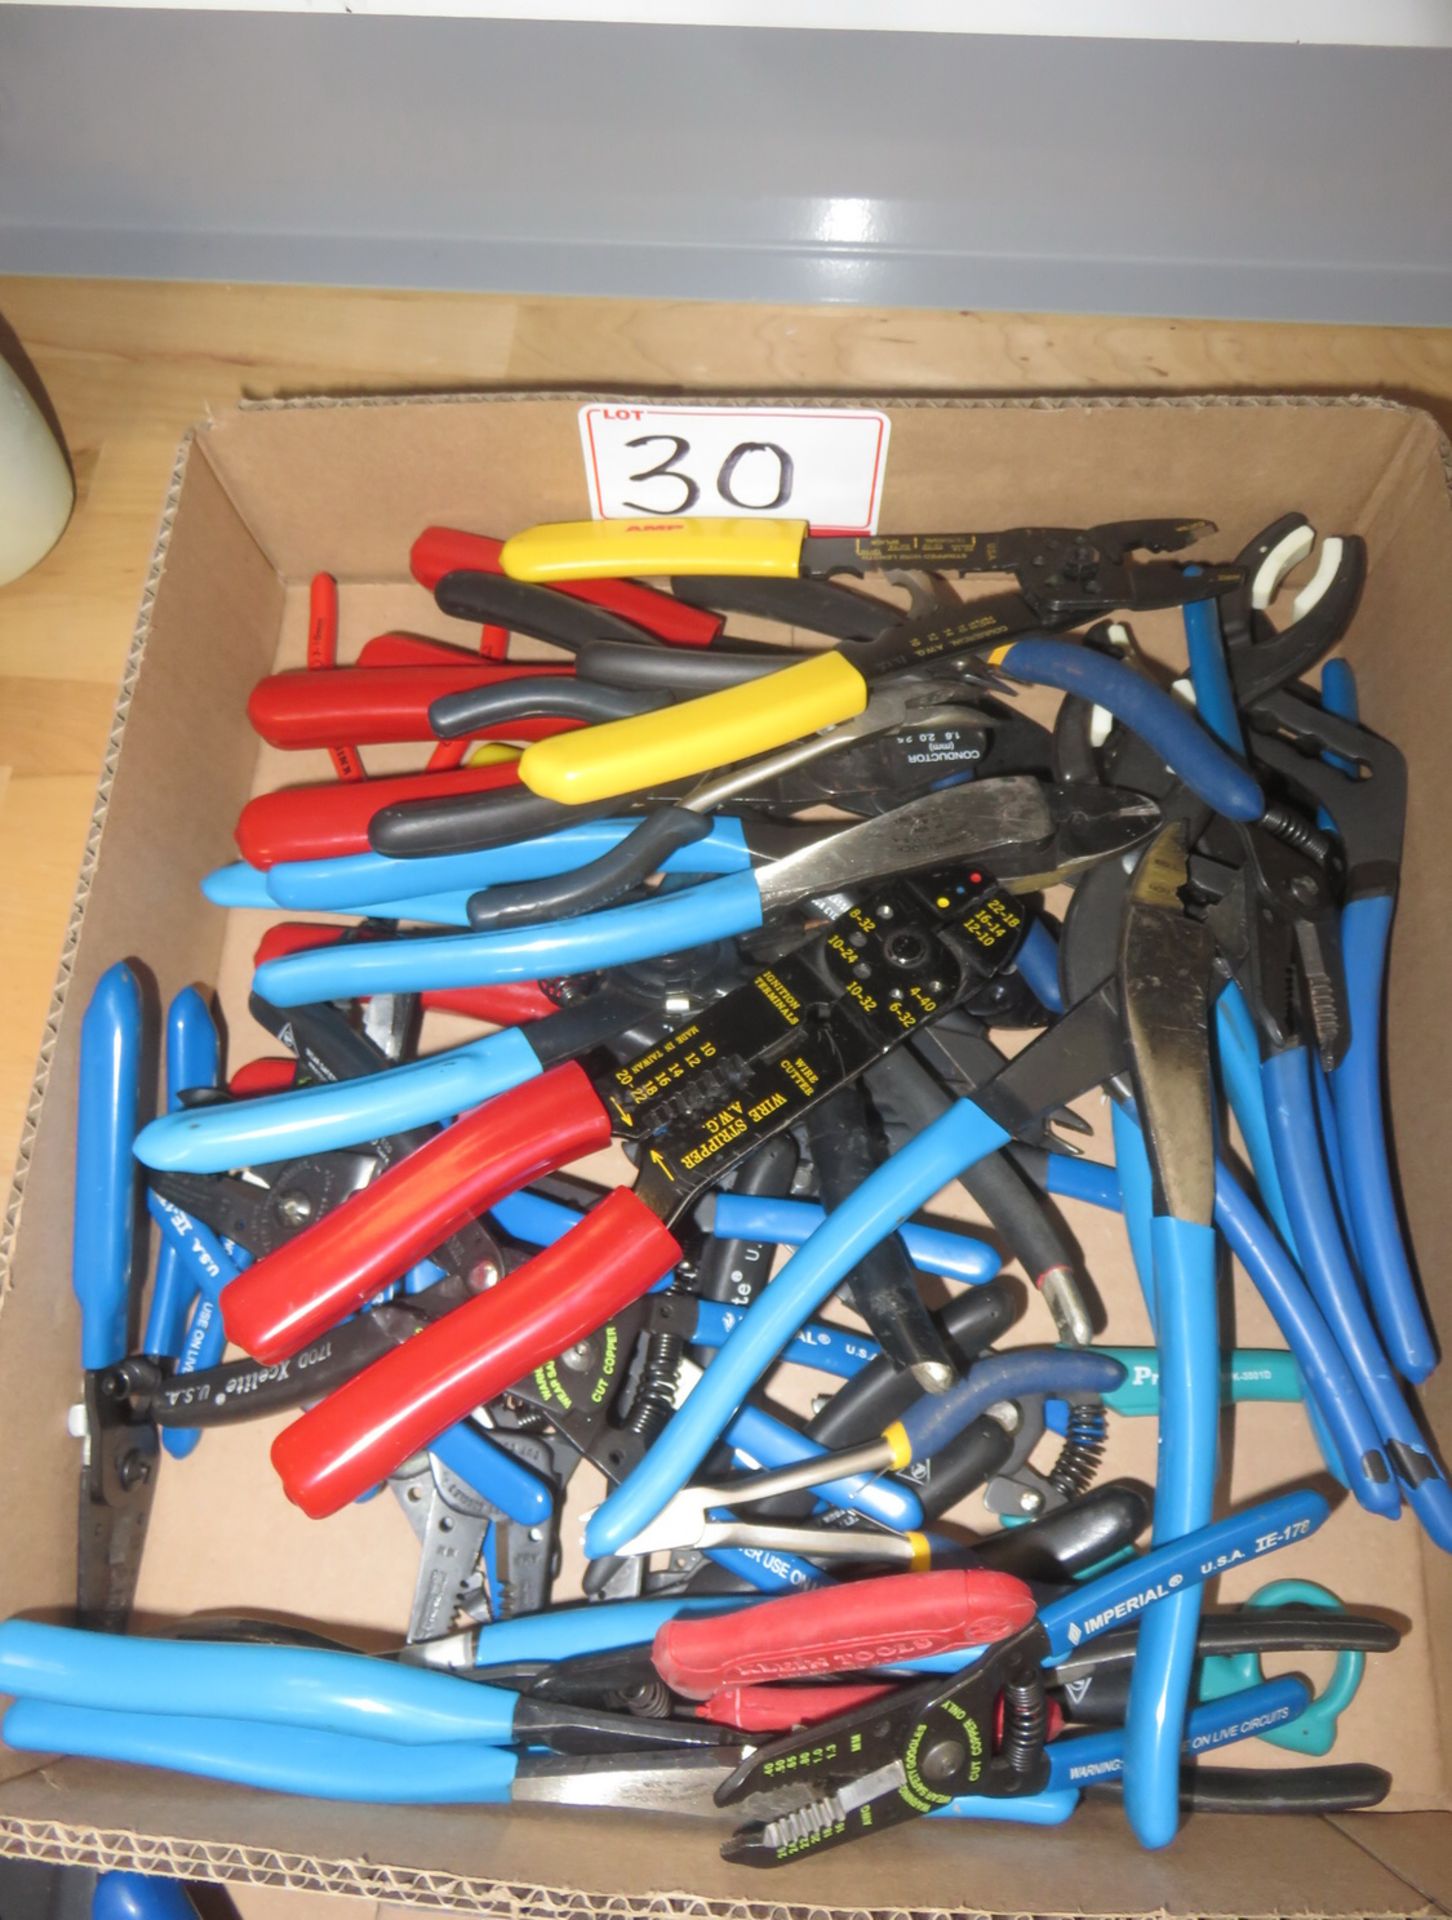 LOT - UNIVERSAL SIDE CUTTERS, WIRE STRIPPERS, PLIERS, & CLIP EXPANDER